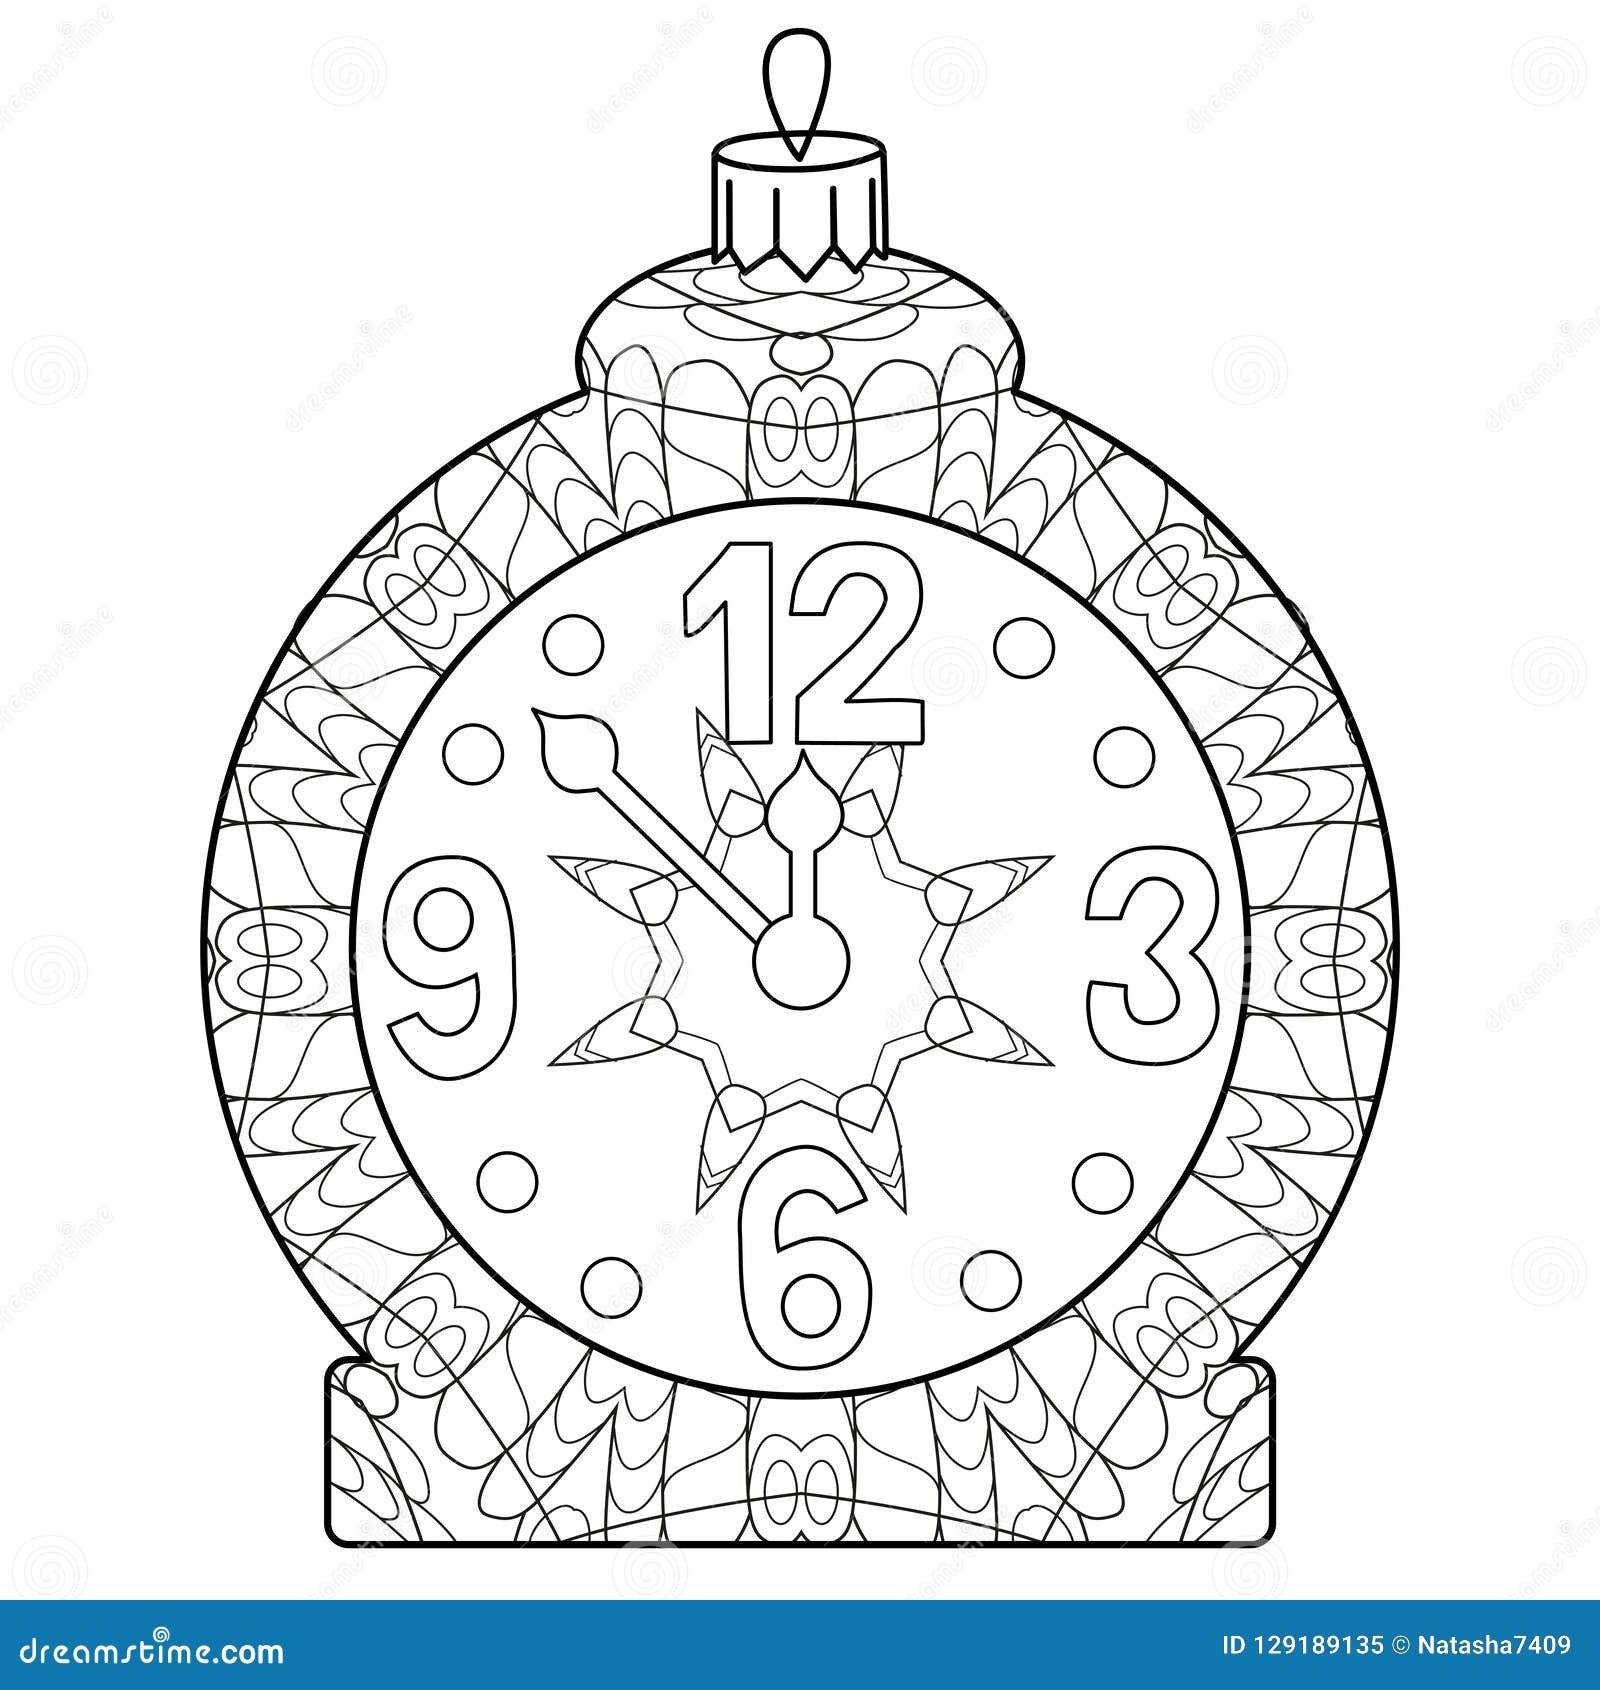 Download Zentangle Stylized Christmas Decorations. Hand Drawn Lace ...